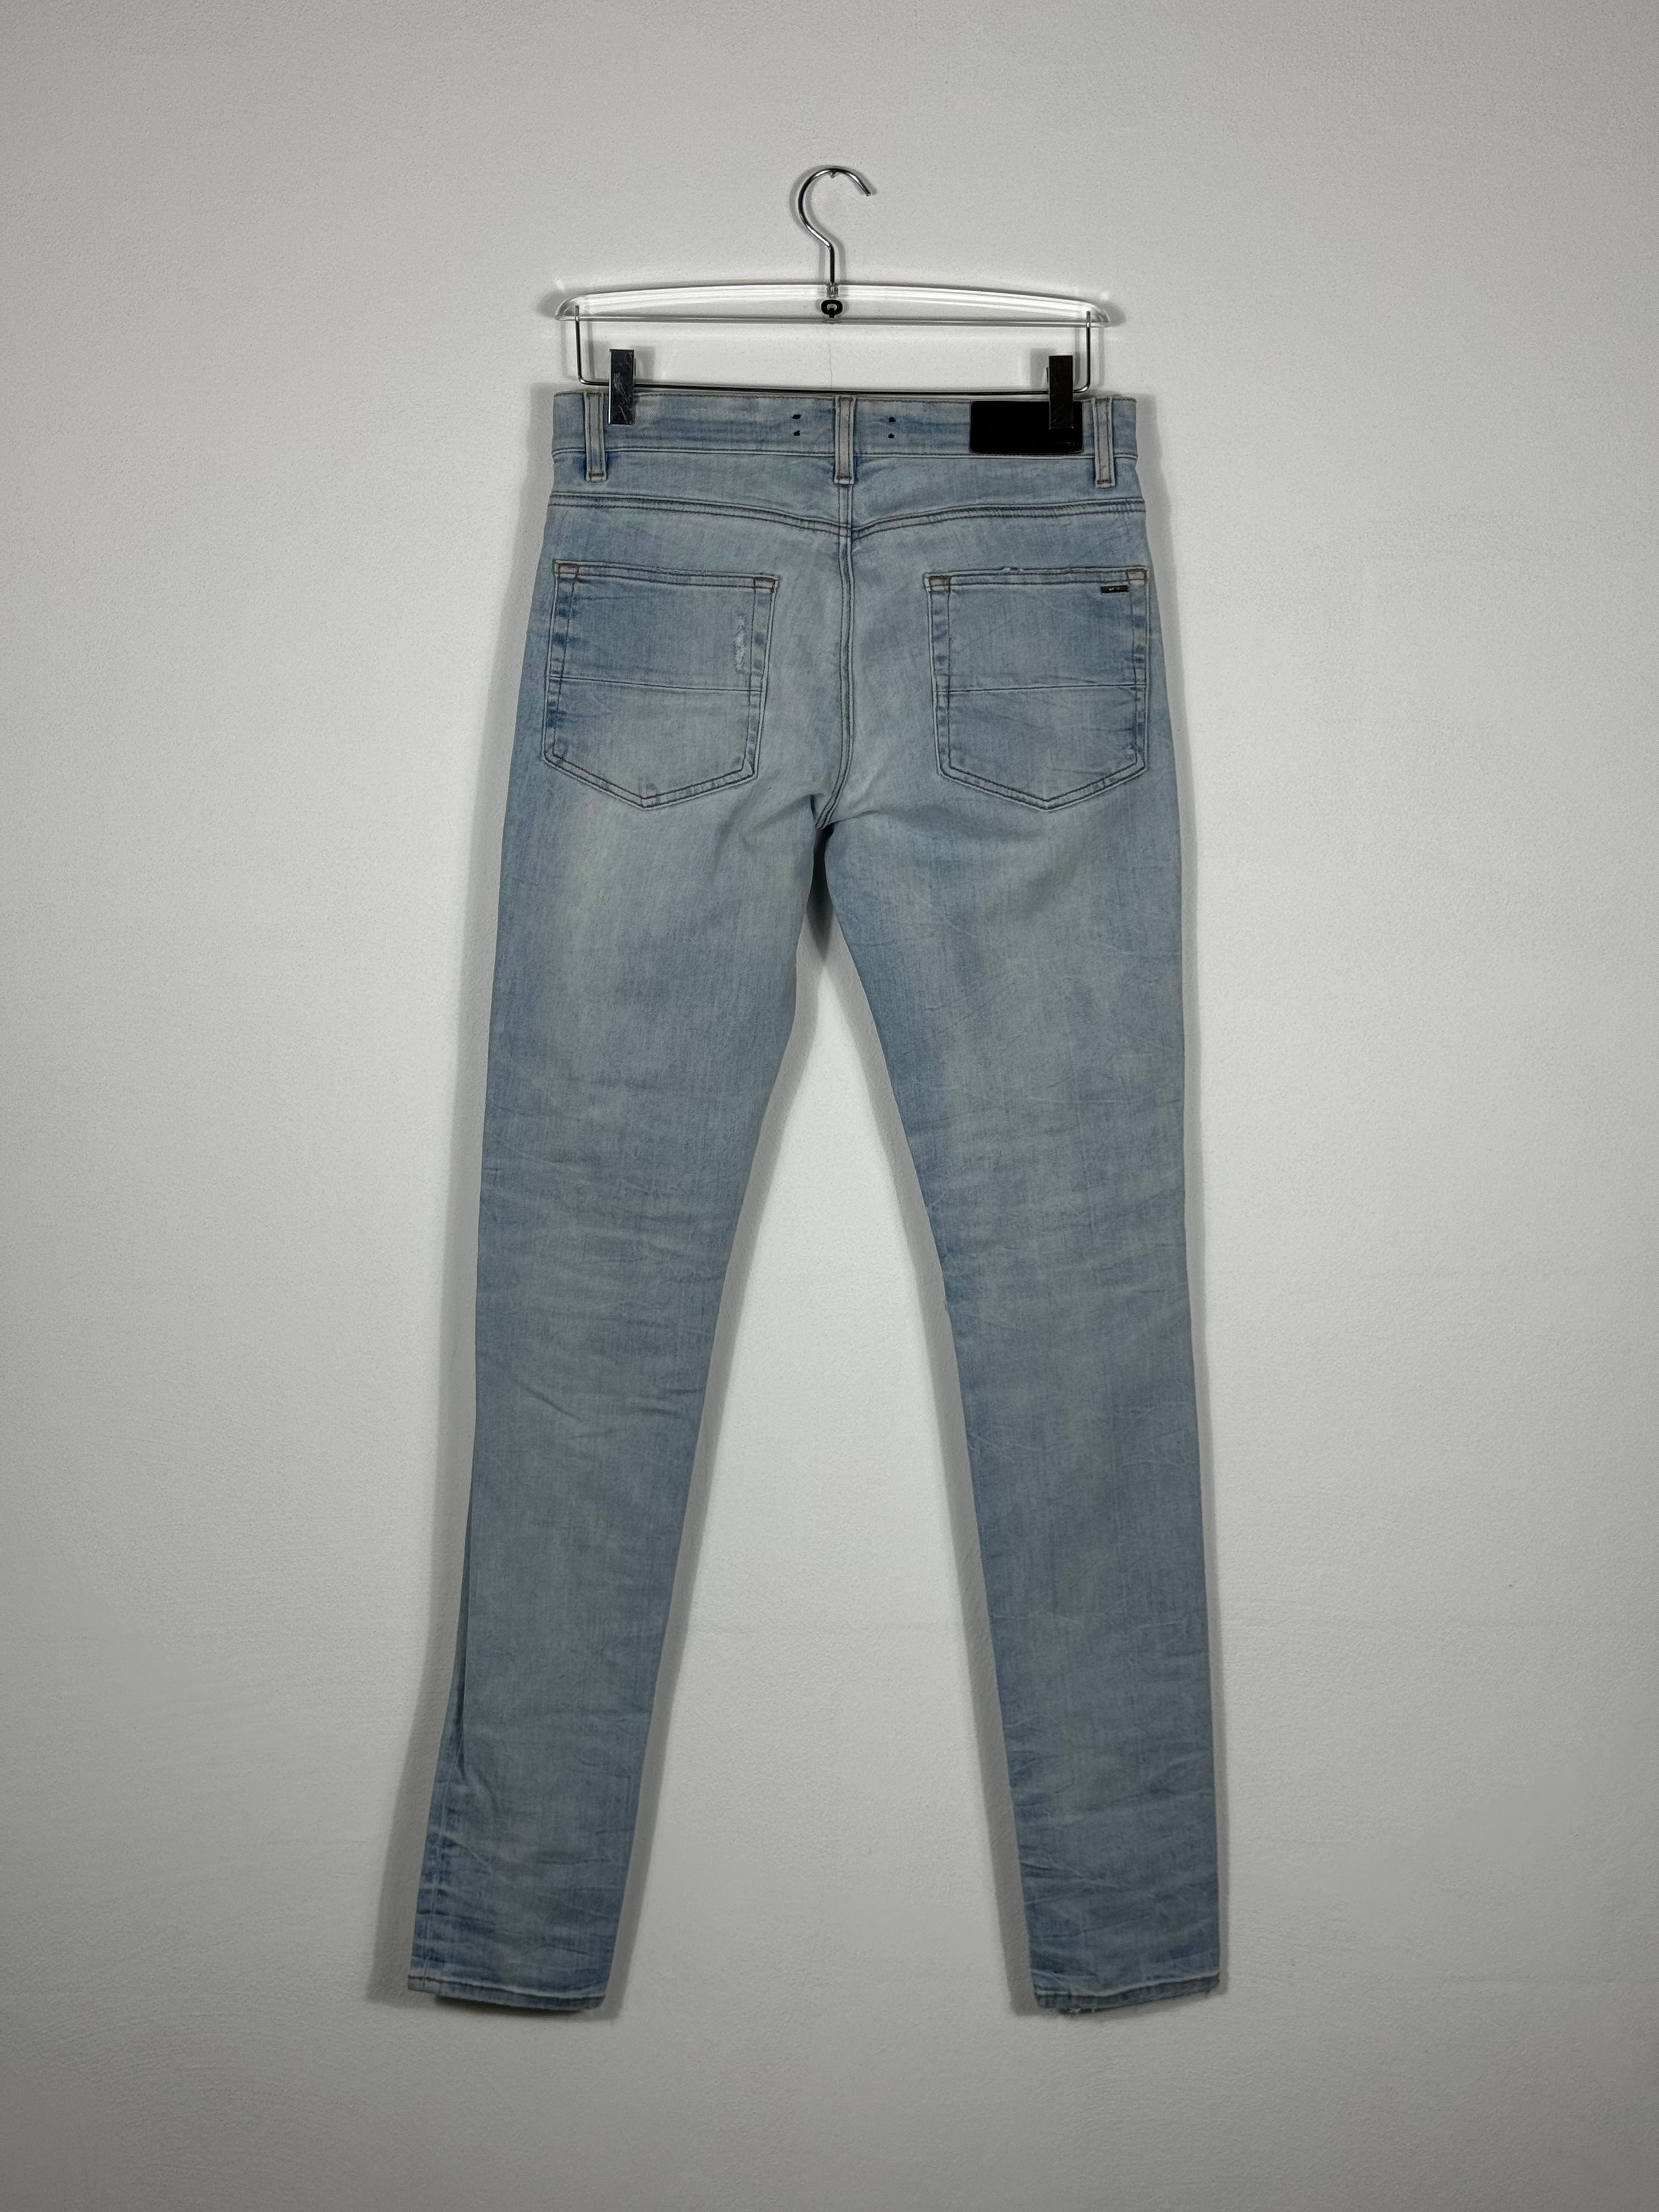 Skinny Jeans With Ripped Details by Sfera Ebbasta